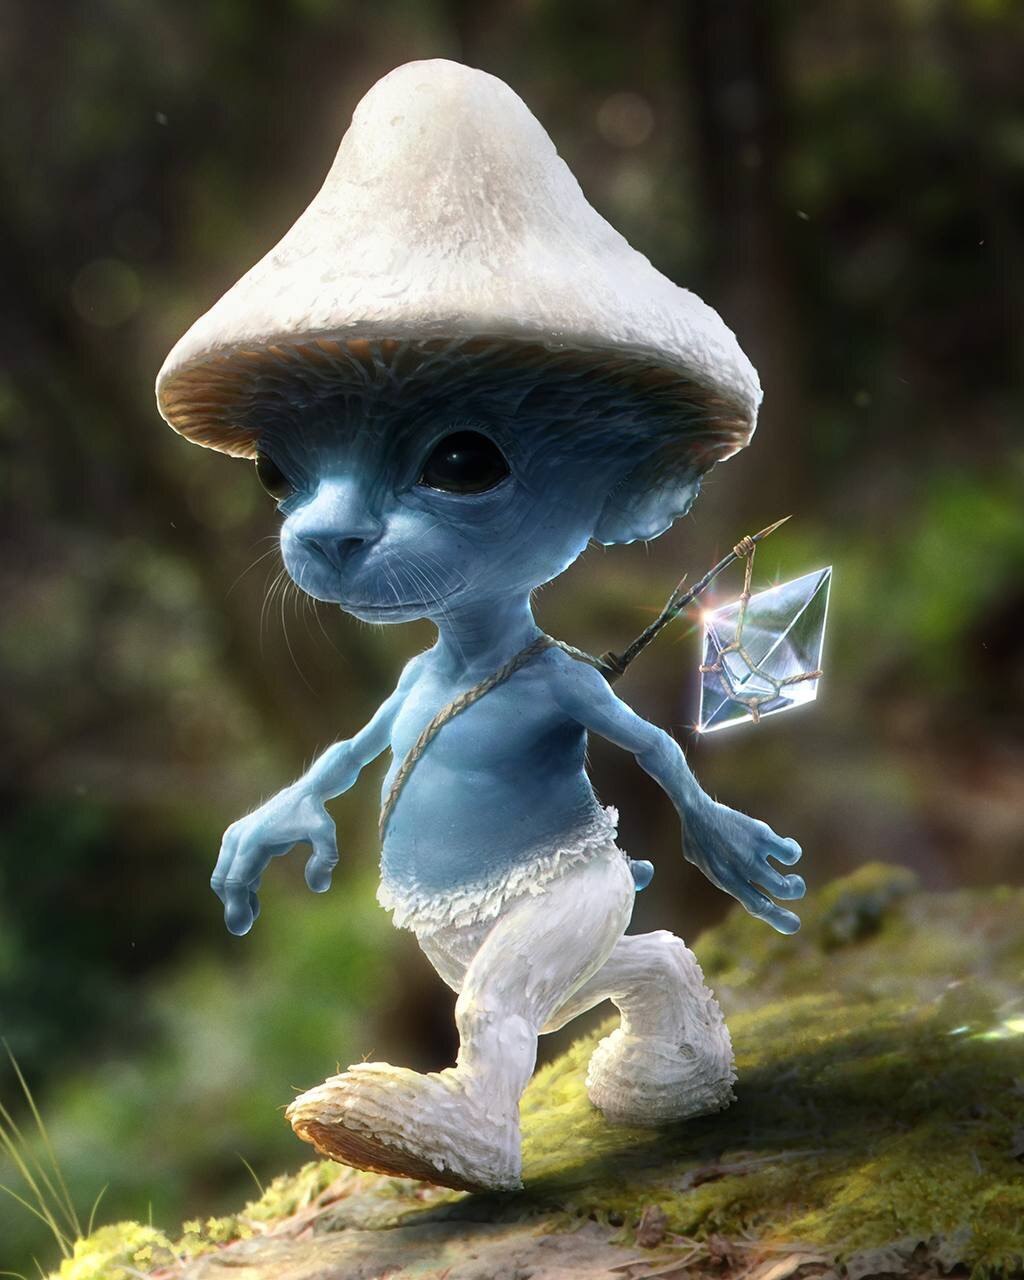 Real Smurf Cat Welcomes Legendary Artist Nate Hallinan to the core community, Original Concept Creator